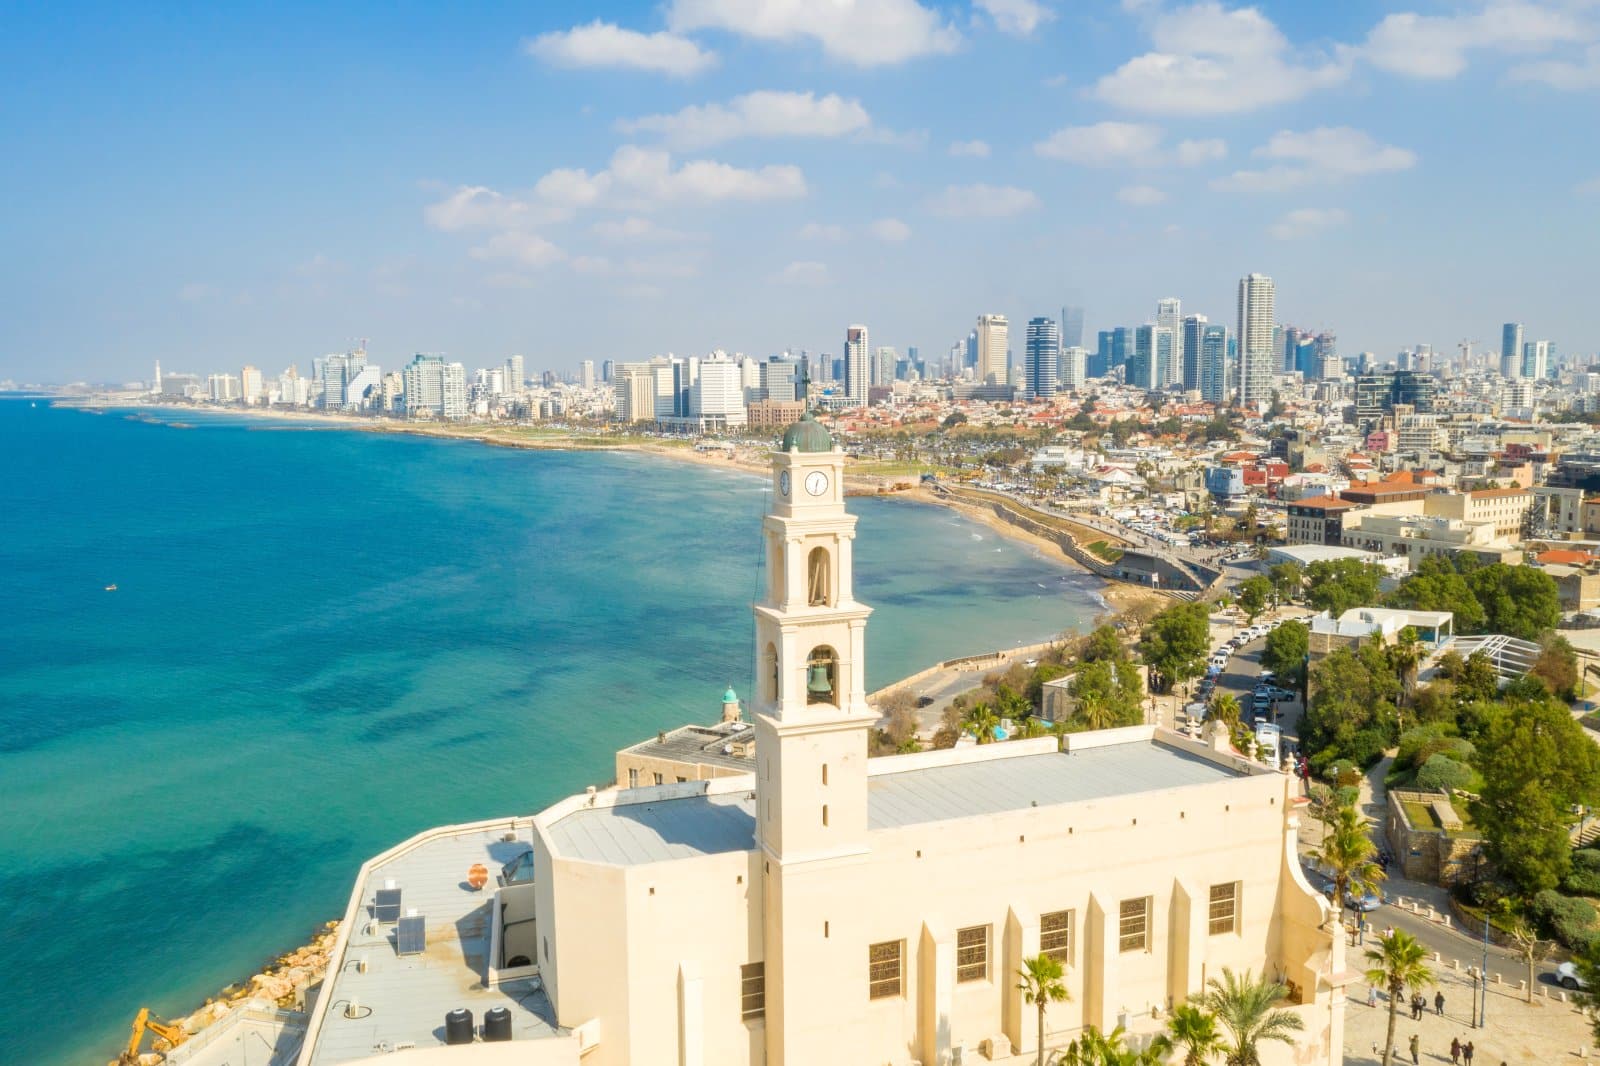 Image Credit: Shutterstock / StockStudio Aerials <p><span>Tel Aviv’s vibrant food scene is a reflection of its diverse population and Mediterranean location. The city is a hotspot for vegan and vegetarian cuisine, focusing on fresh, local ingredients like fruits, vegetables, nuts, and legumes. Traditional dishes such as hummus, falafel, and baba ganoush are naturally plant-based and available throughout the city, often with a modern twist.</span></p> <p><b>Insider’s Tip: </b><span>Join a vegan food tour to discover hidden gems and learn how traditional Israeli dishes are adapted to vegan diets.</span></p>